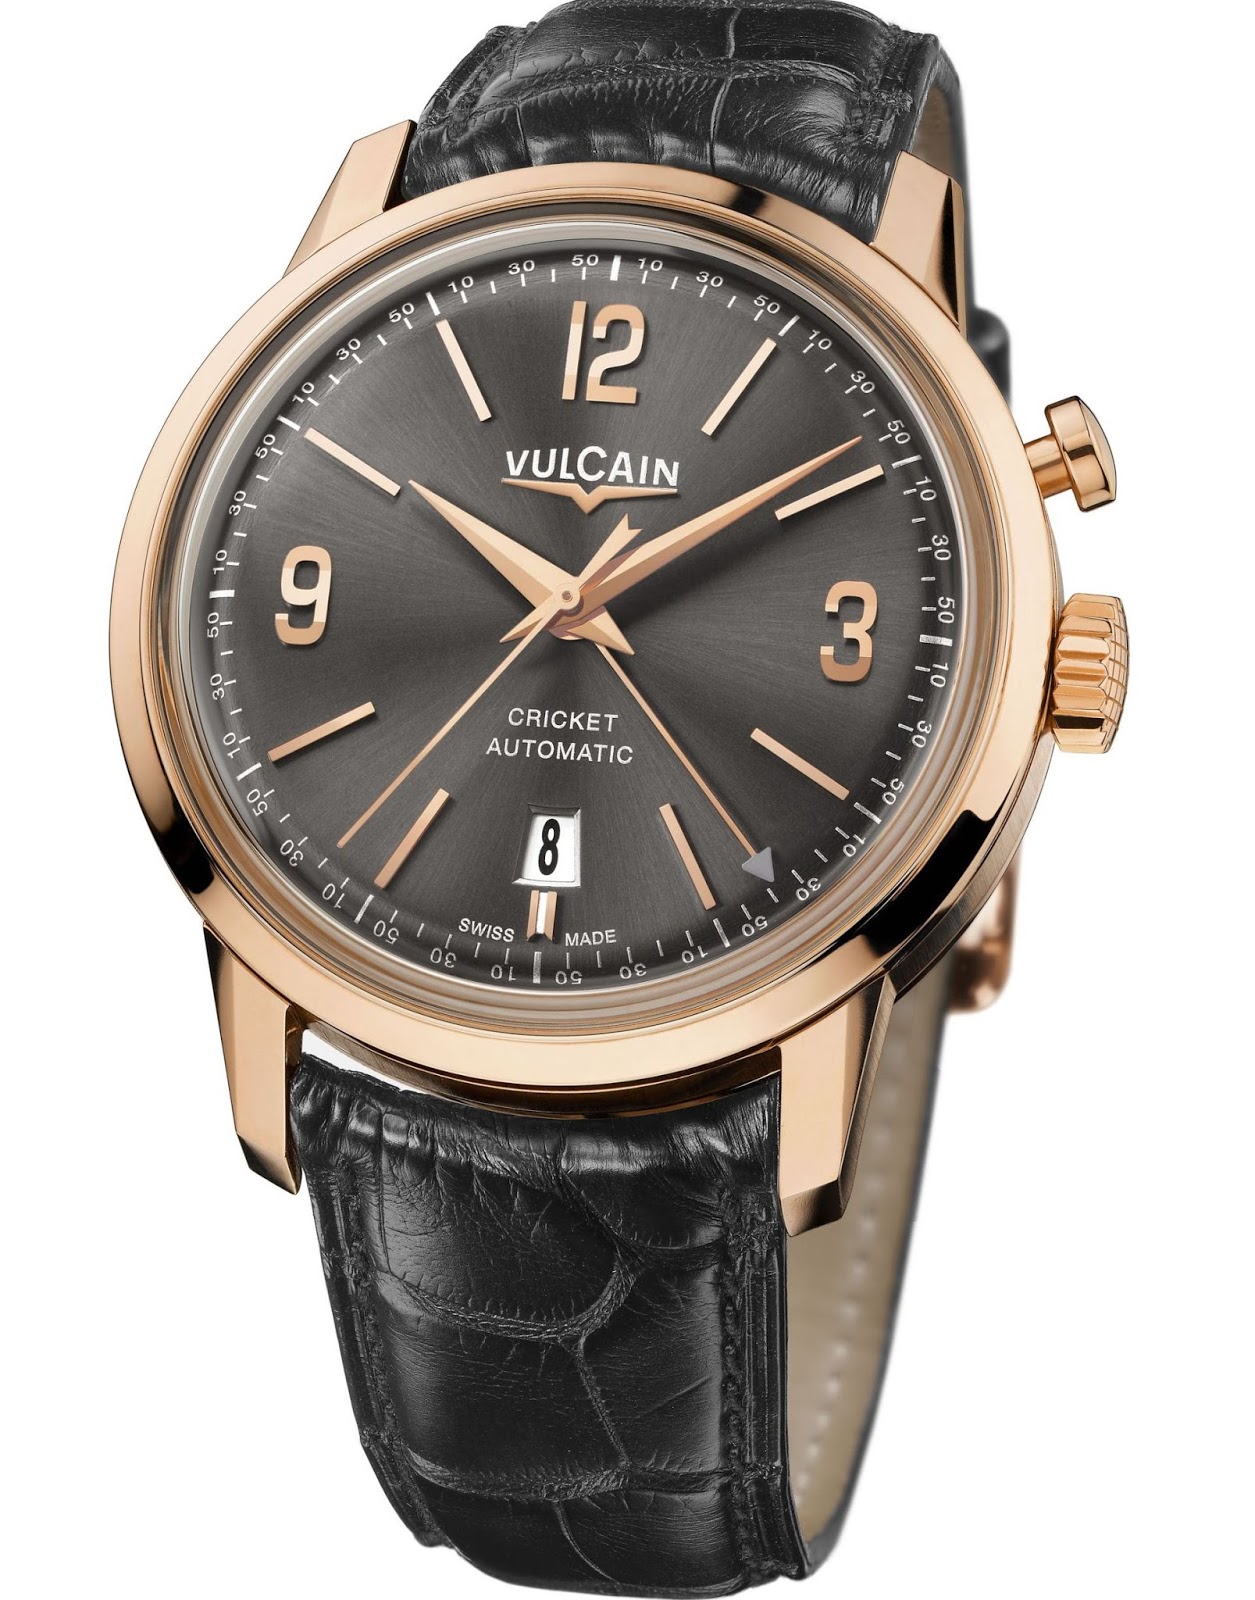 Vulcain 50s Presidents’ Watch with Cricket Alarm Calibre V-21 Automatic